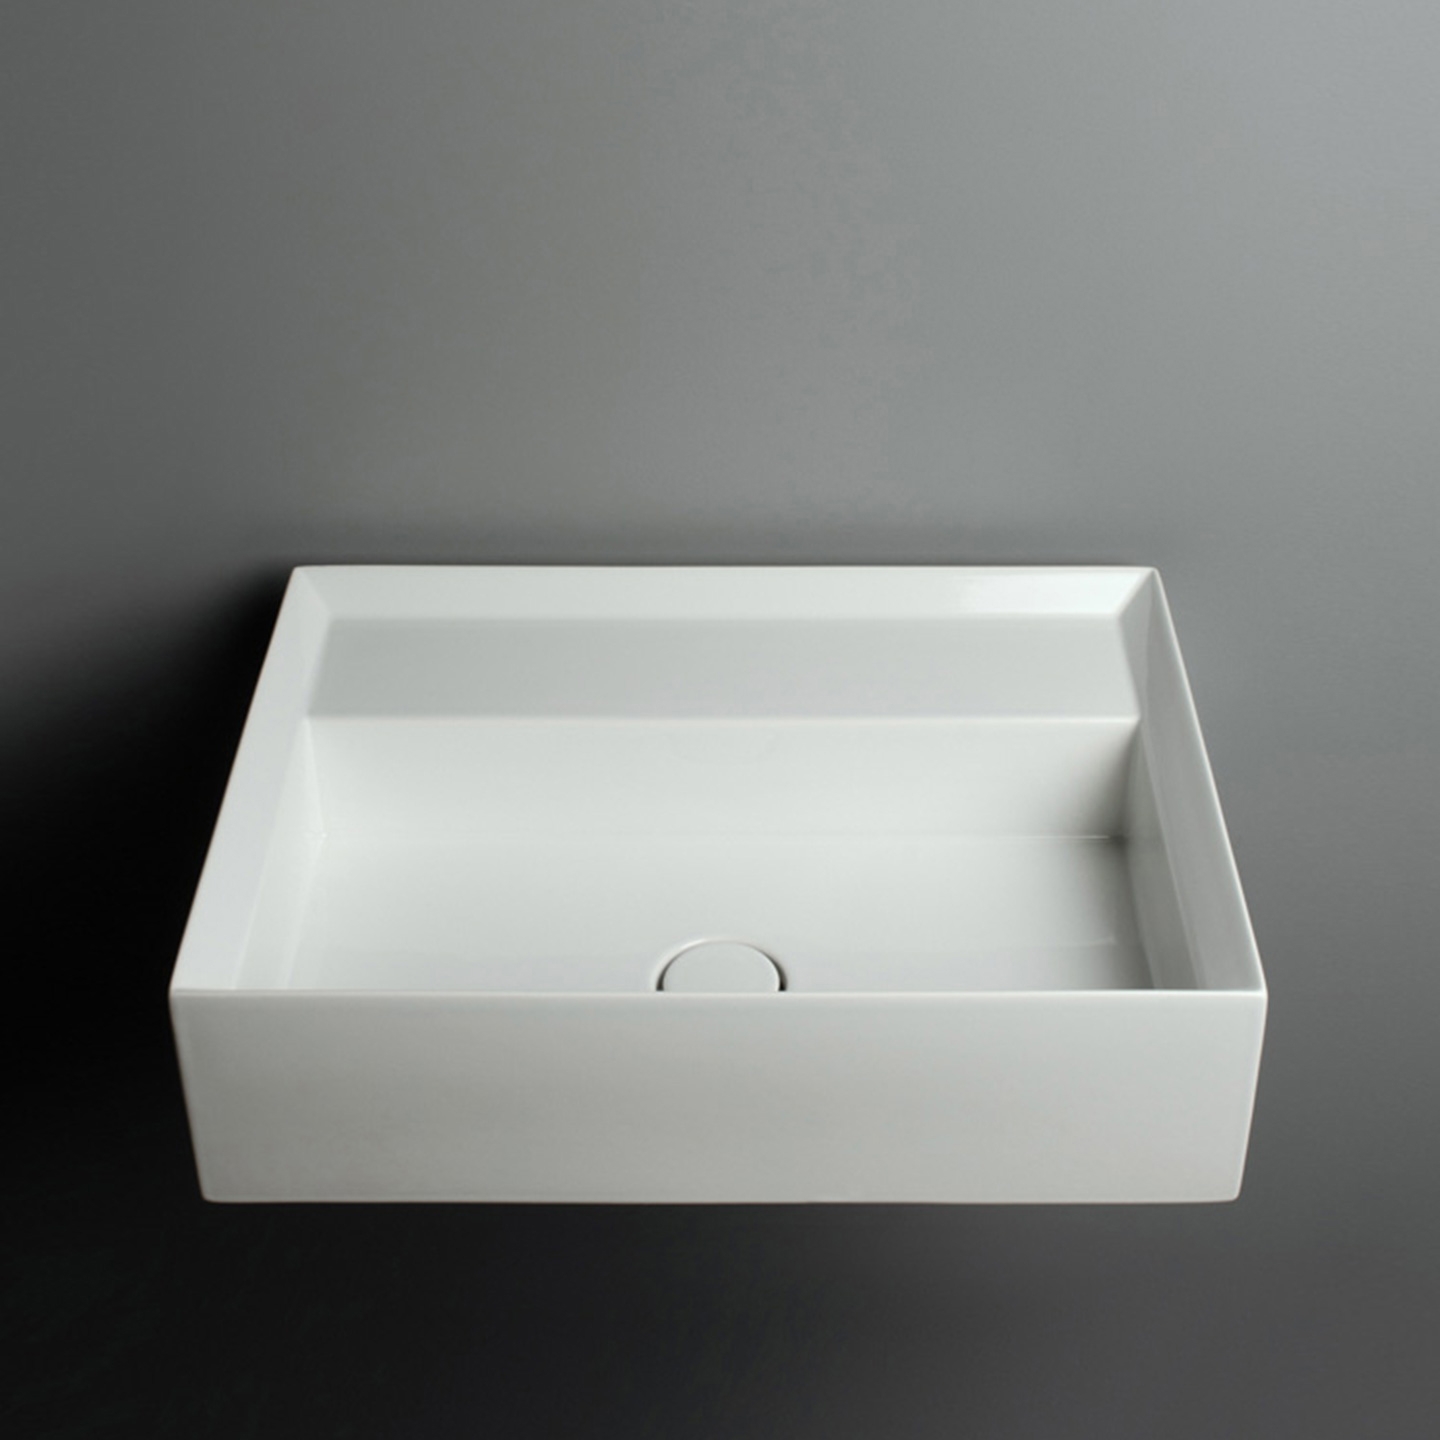 Cut 60.45 (CTL04) Glossy White Bathroom Sink Without Faucet Hole